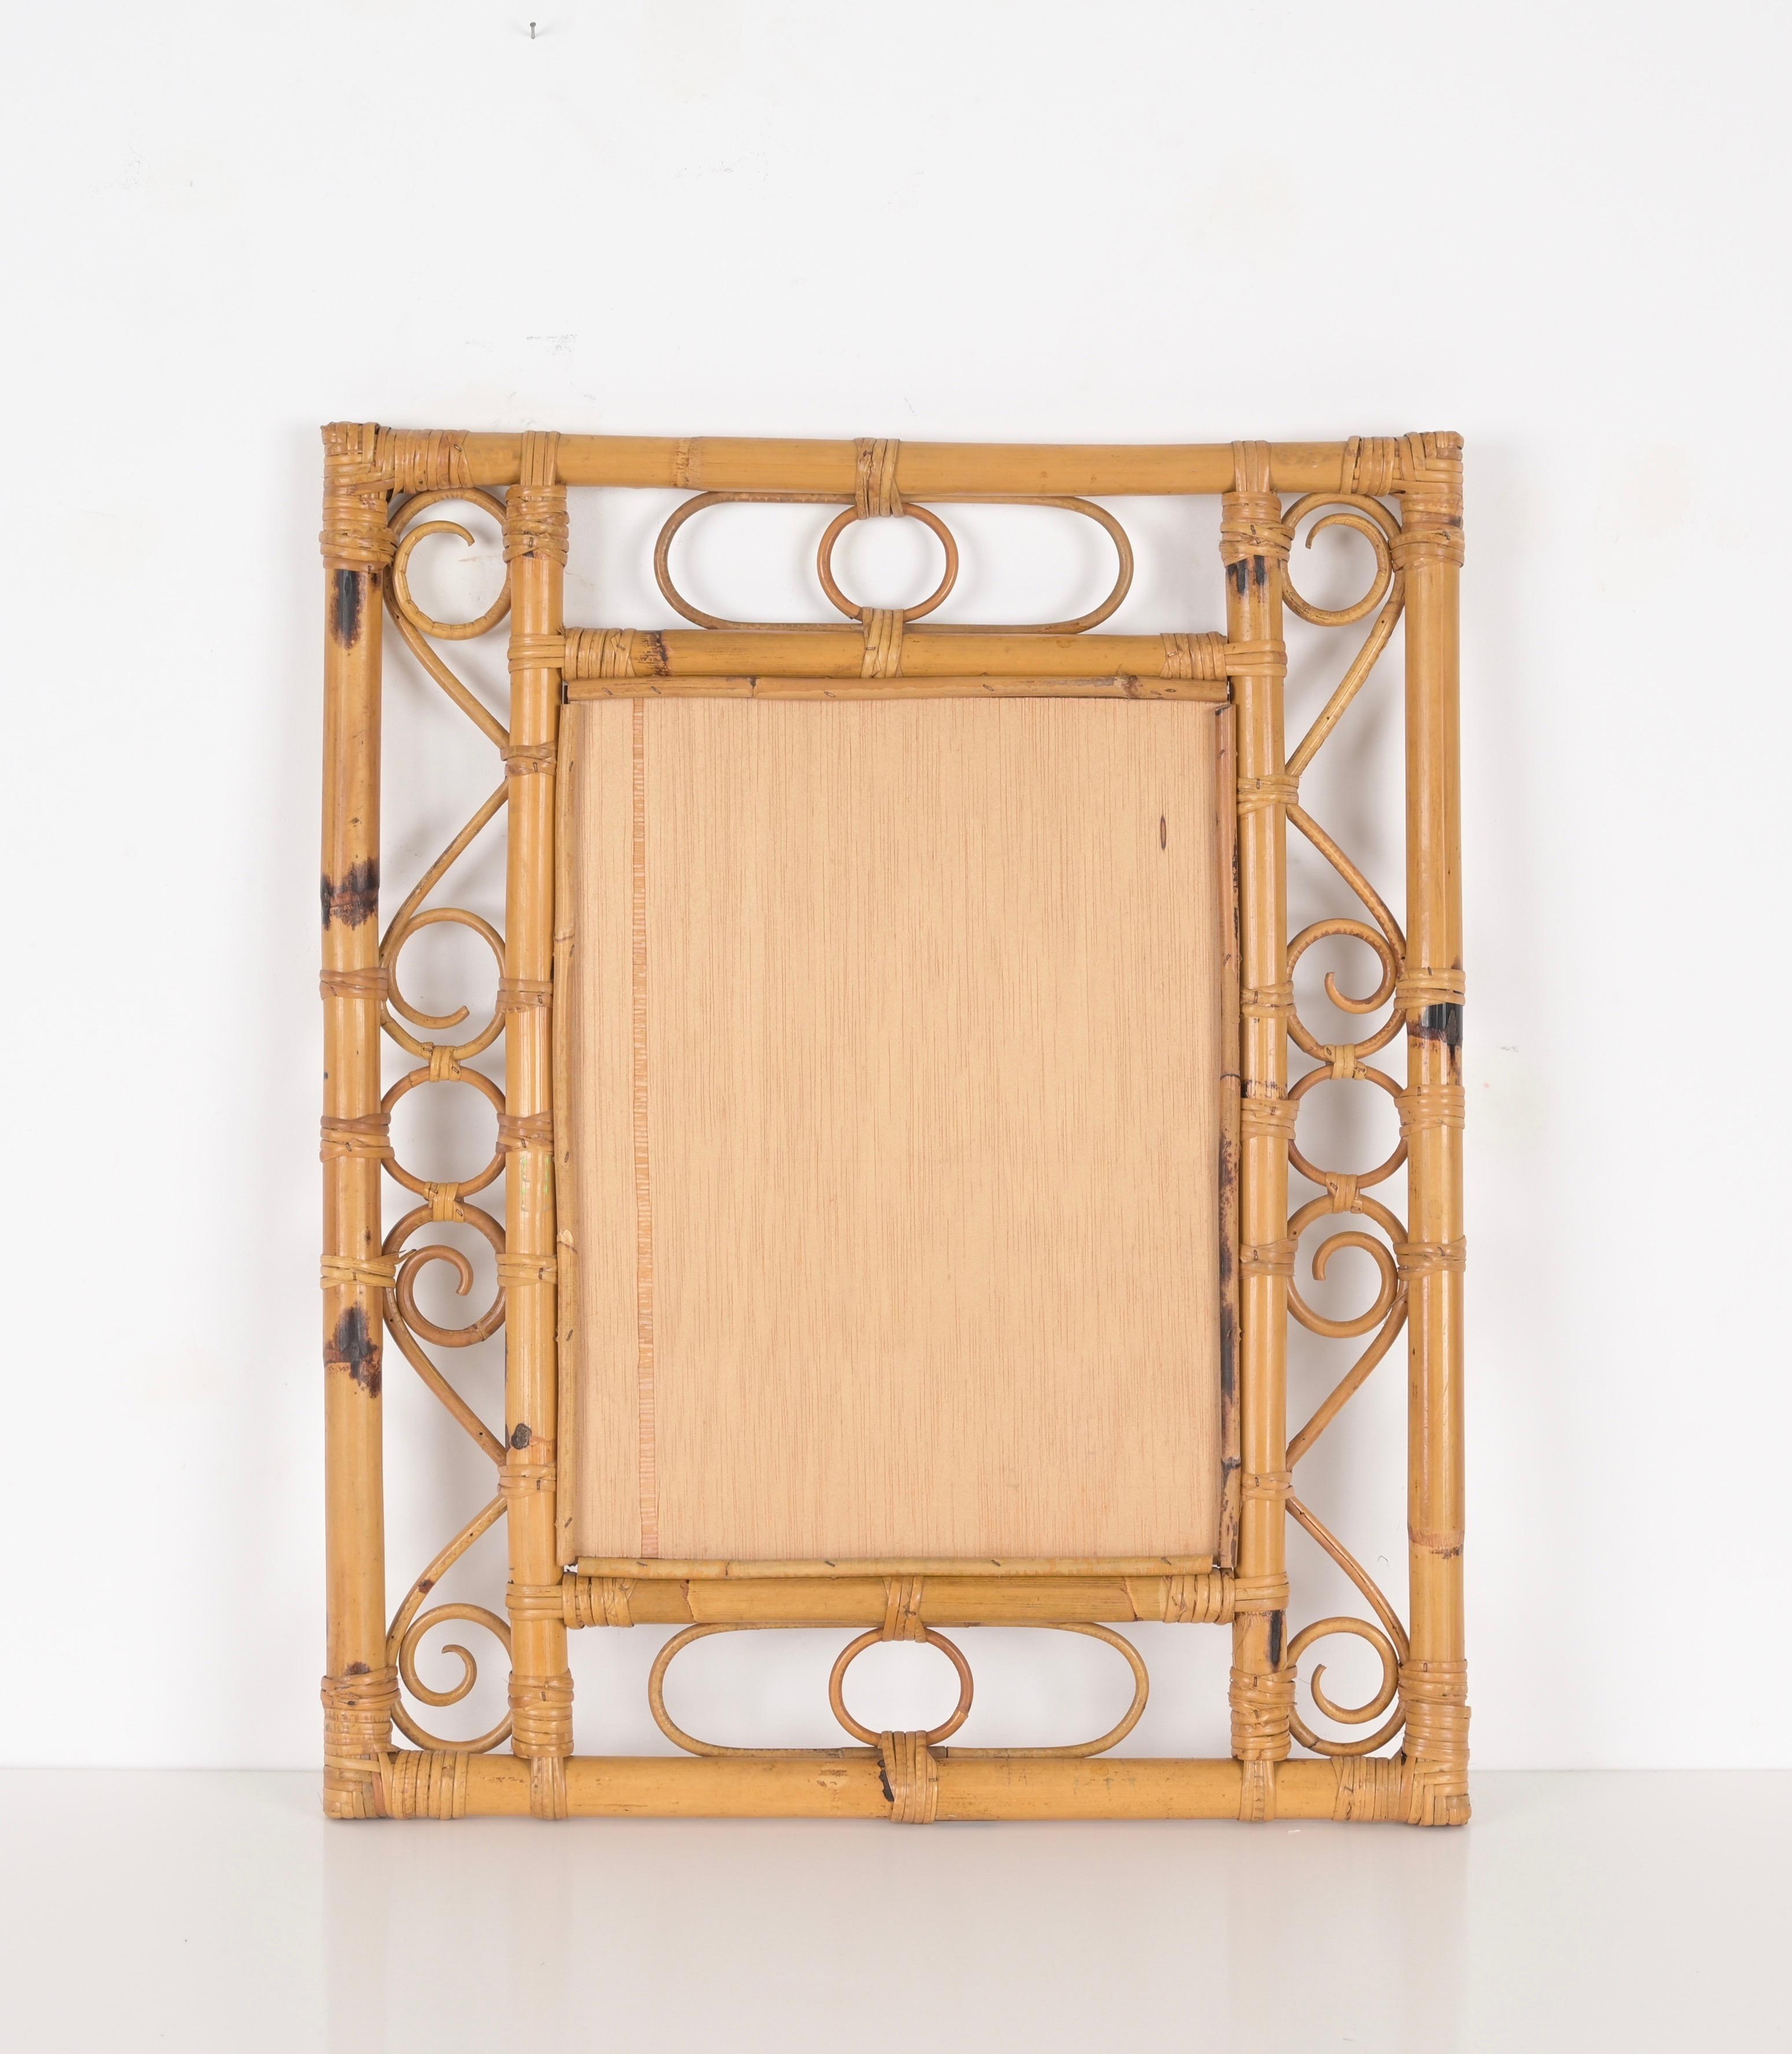 Midcentury French Riviera Bamboo, Rattan, Wicker Rectangular Mirror, Italy 1960s For Sale 3